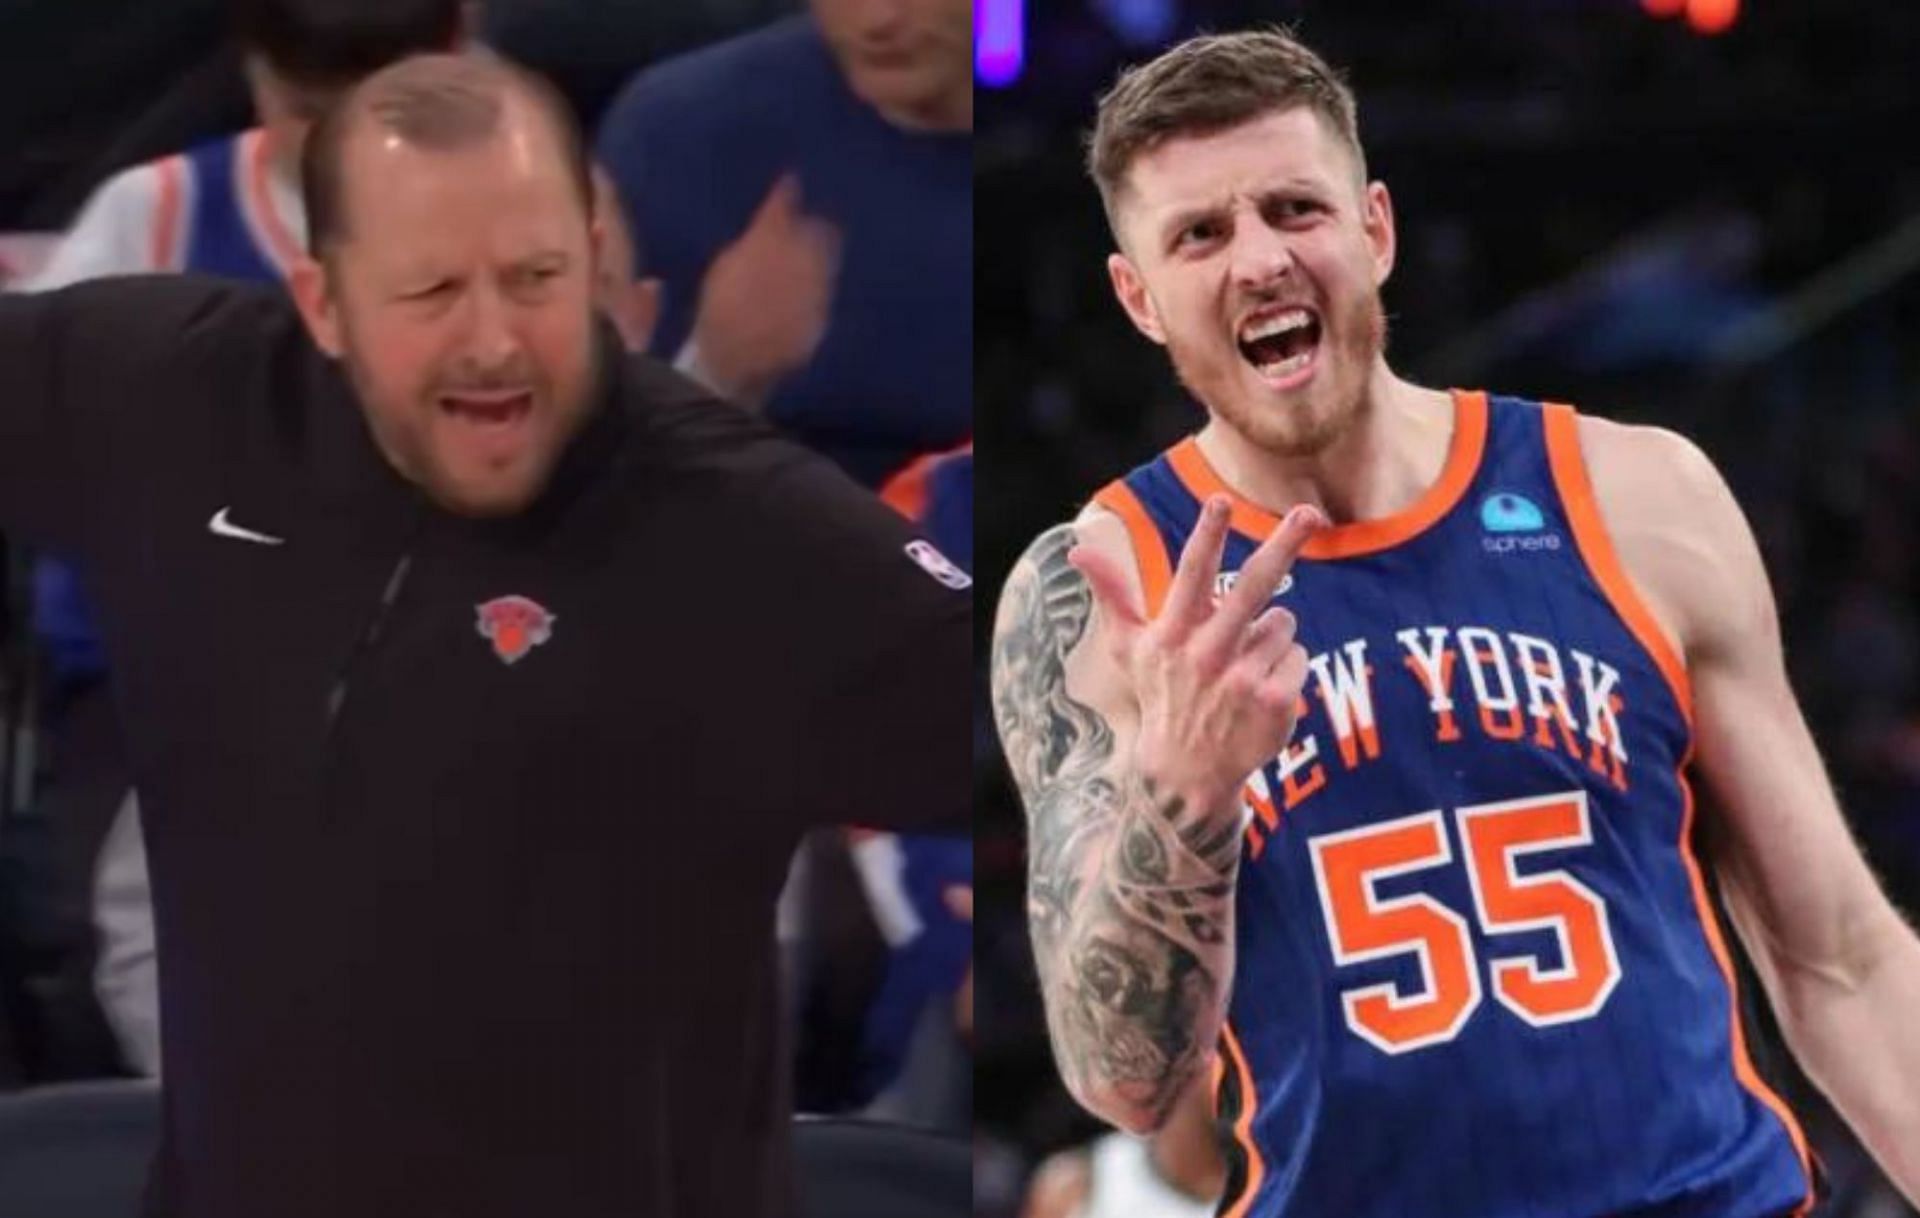 Coach Tom Thibodeau has a choice of words for Isaiah Hartenstein after a bad play